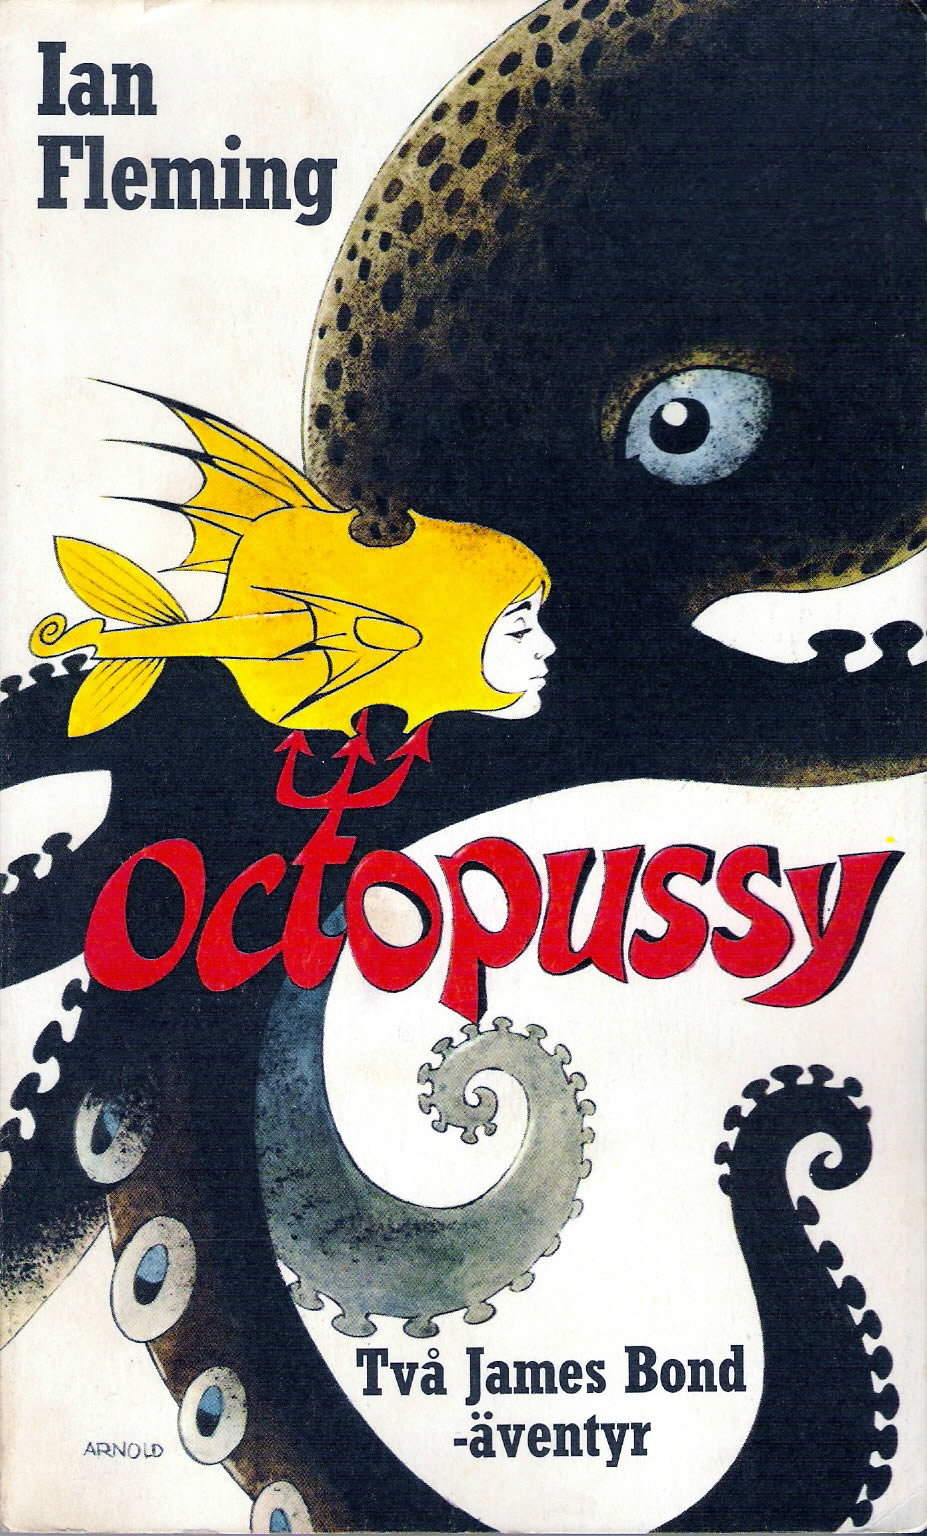 First edition UK hardcover of Octopussy (1966)